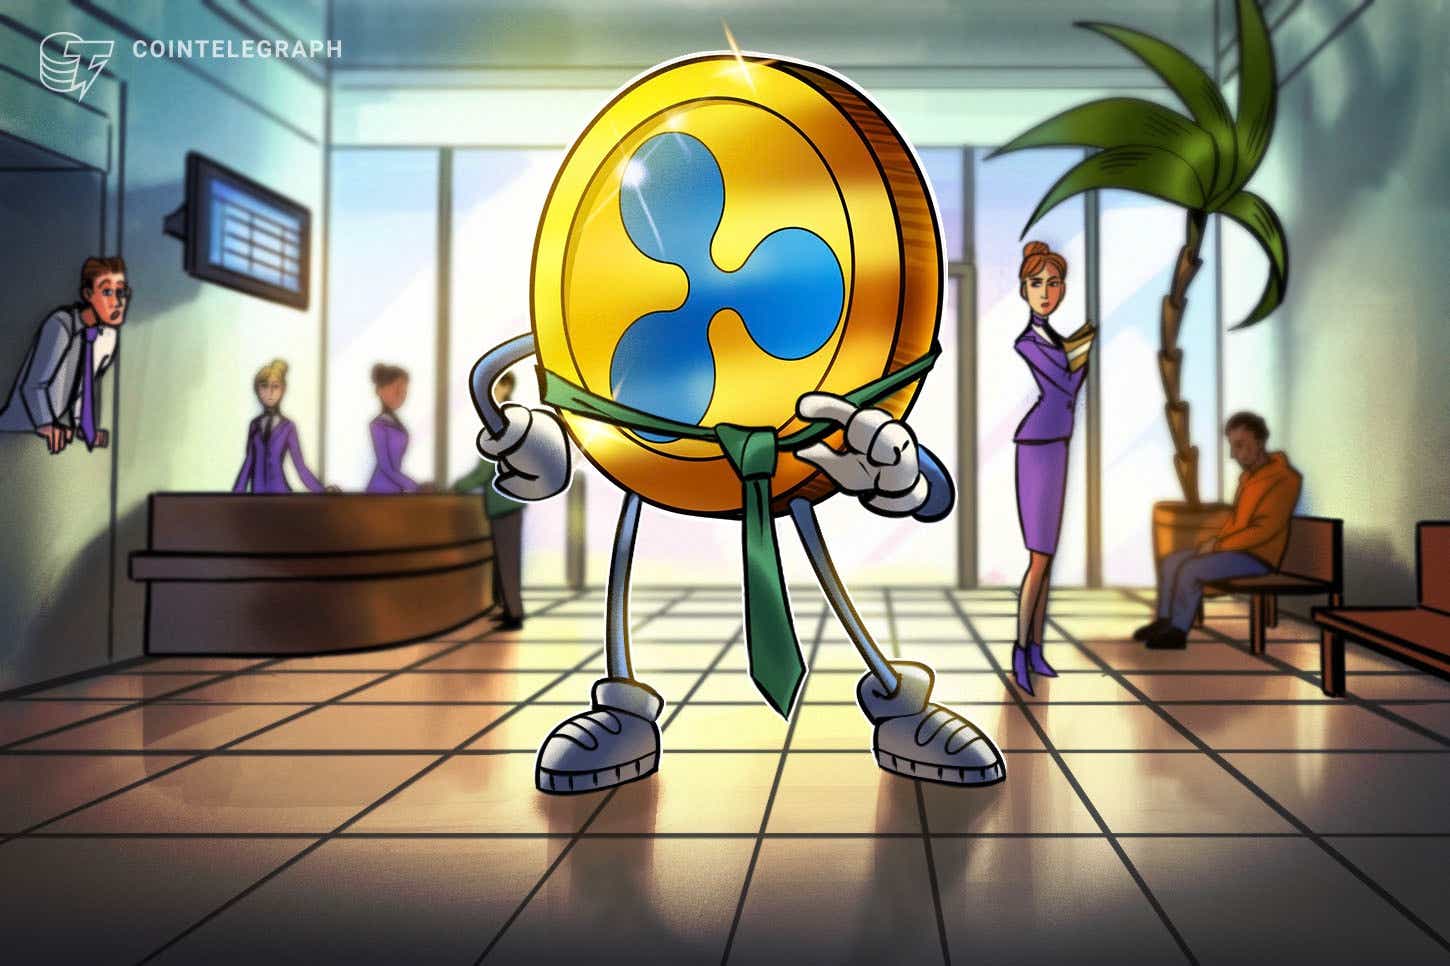 Ripple-outlines-possible-regulatory-framework-for-crypto-industry-in-us